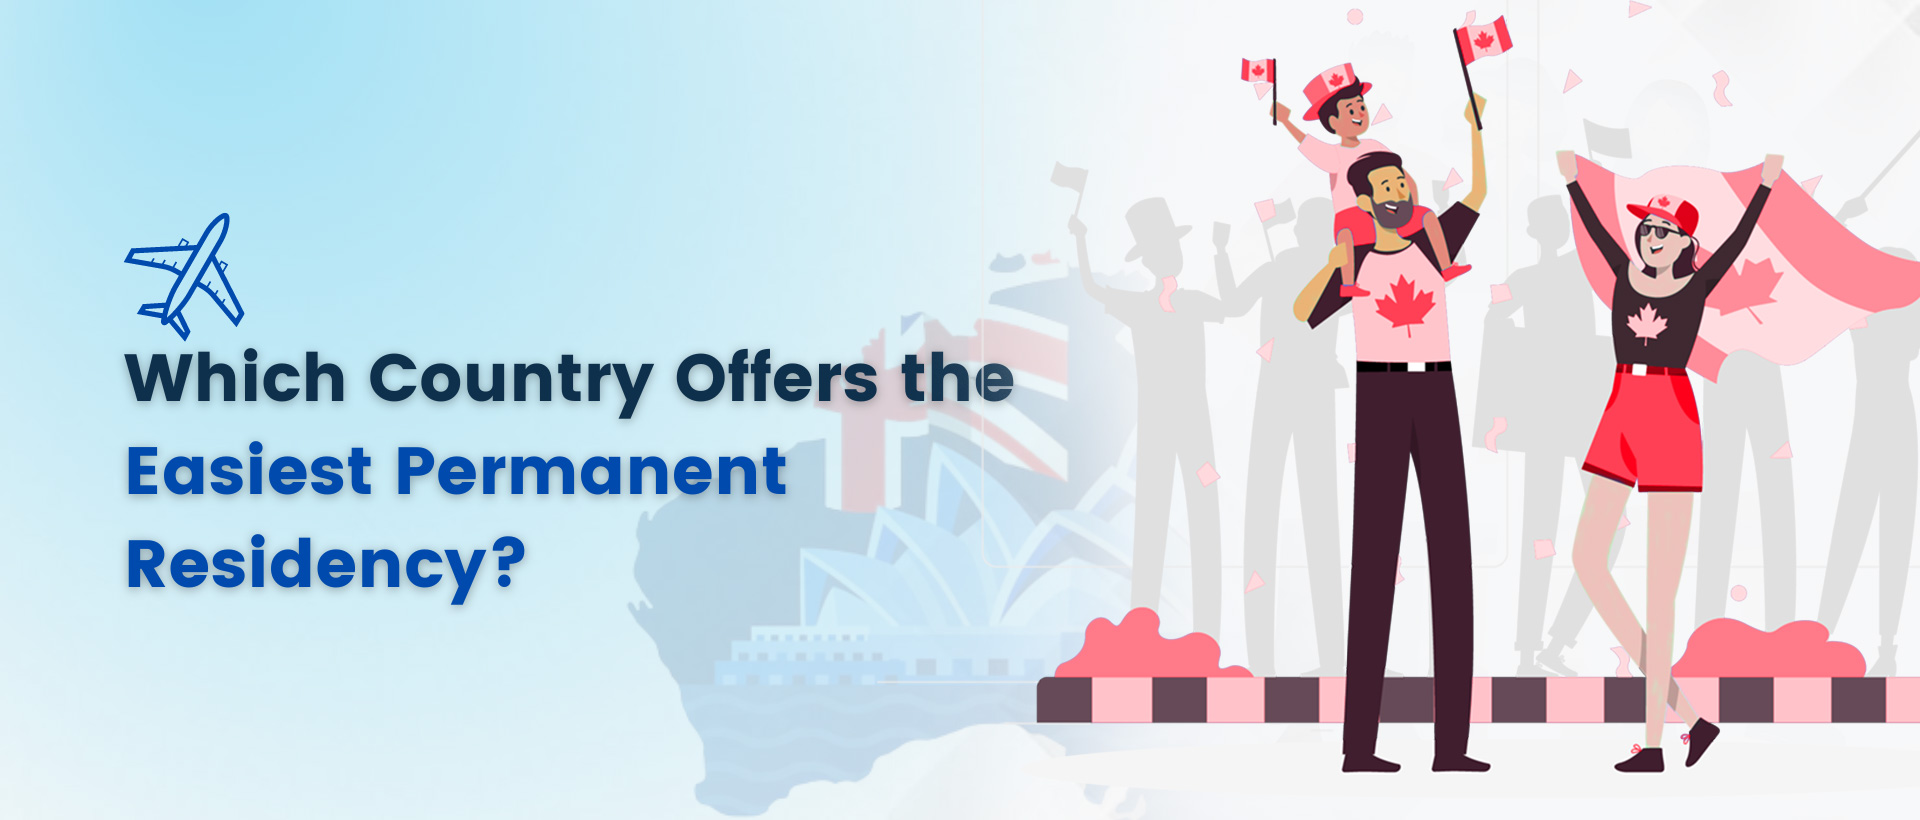 Which Country Offers the Easiest Permanent Residency